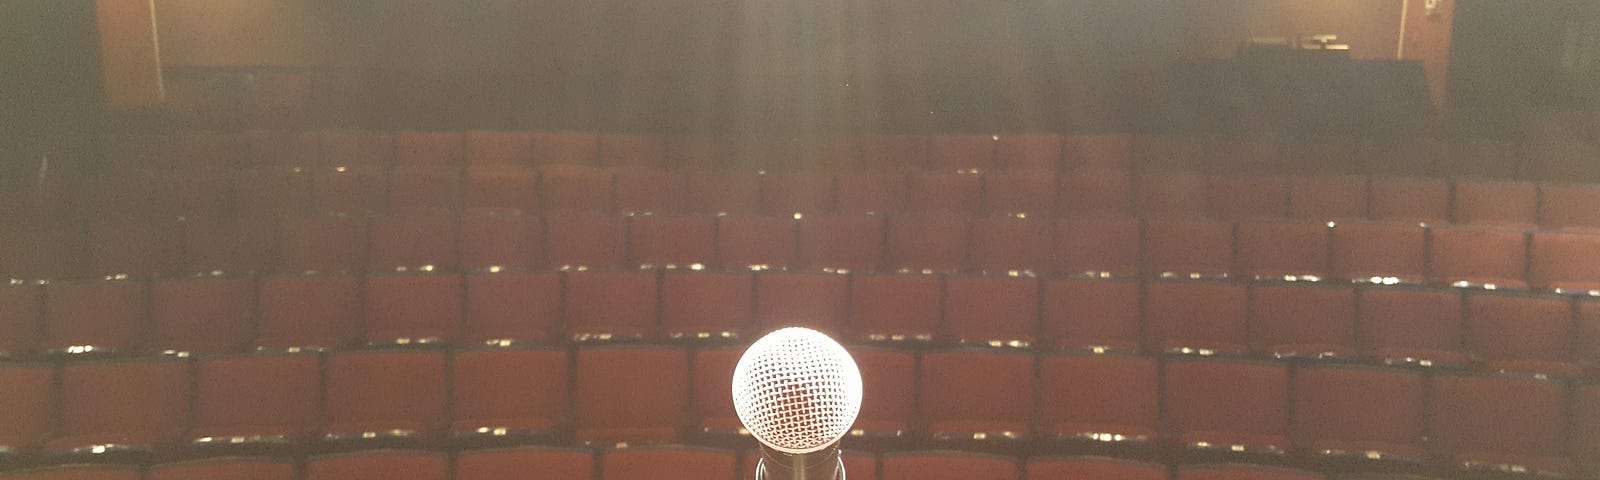 View from stage behind microphone looking into an empty theater.